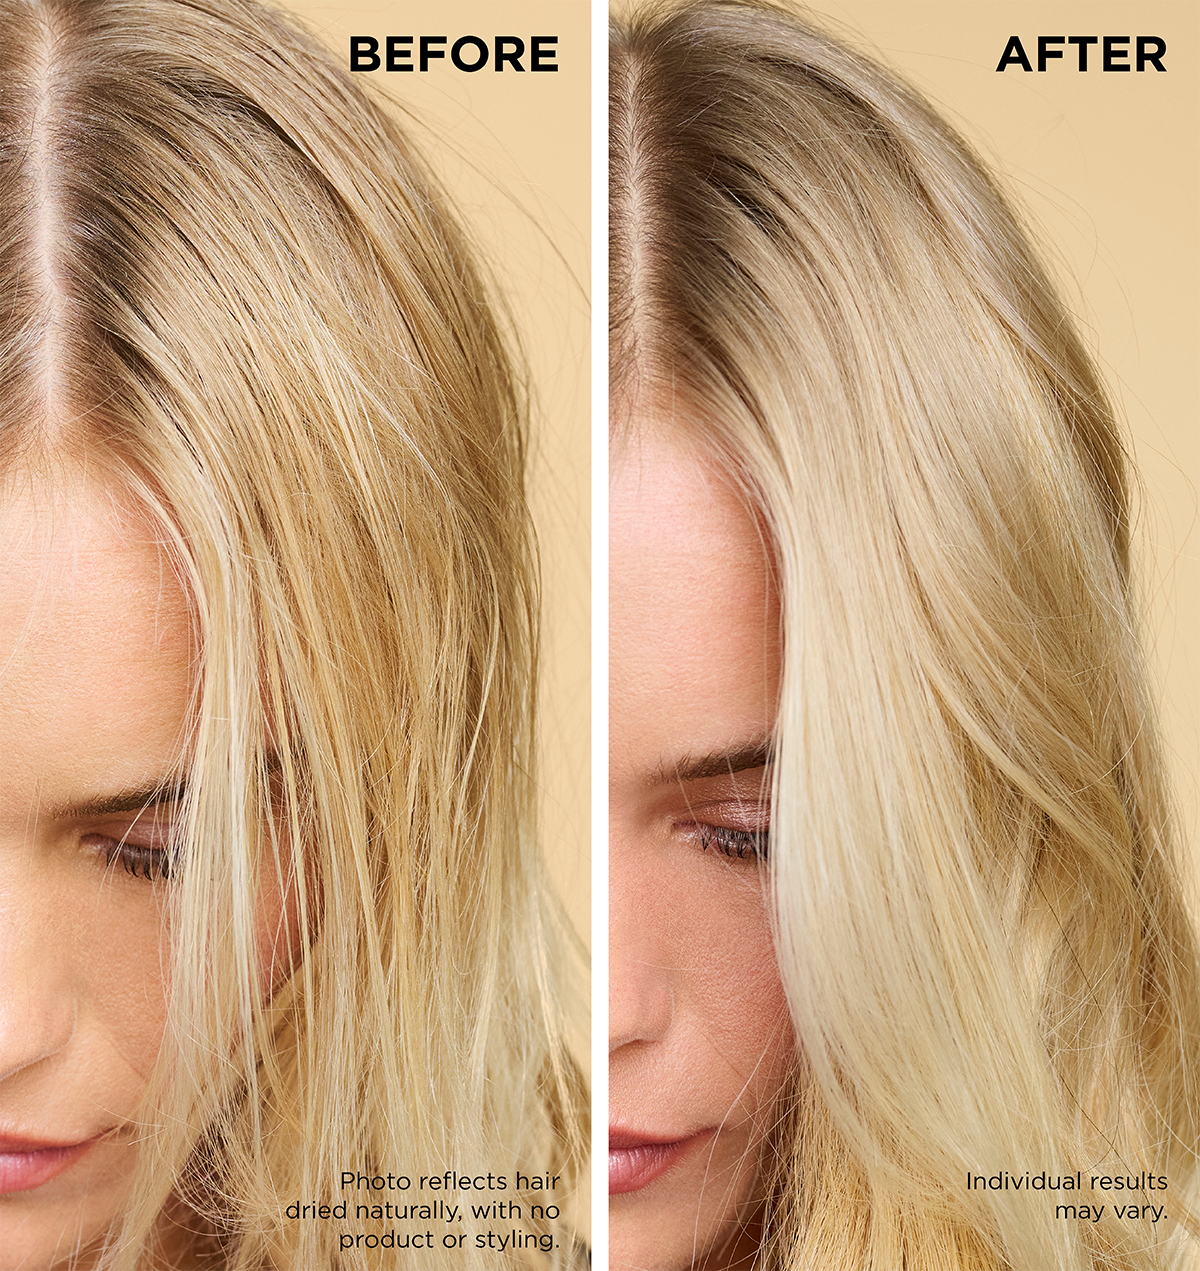 A before and after photo where the model's hair is notably fuller with more volume in the after photo.